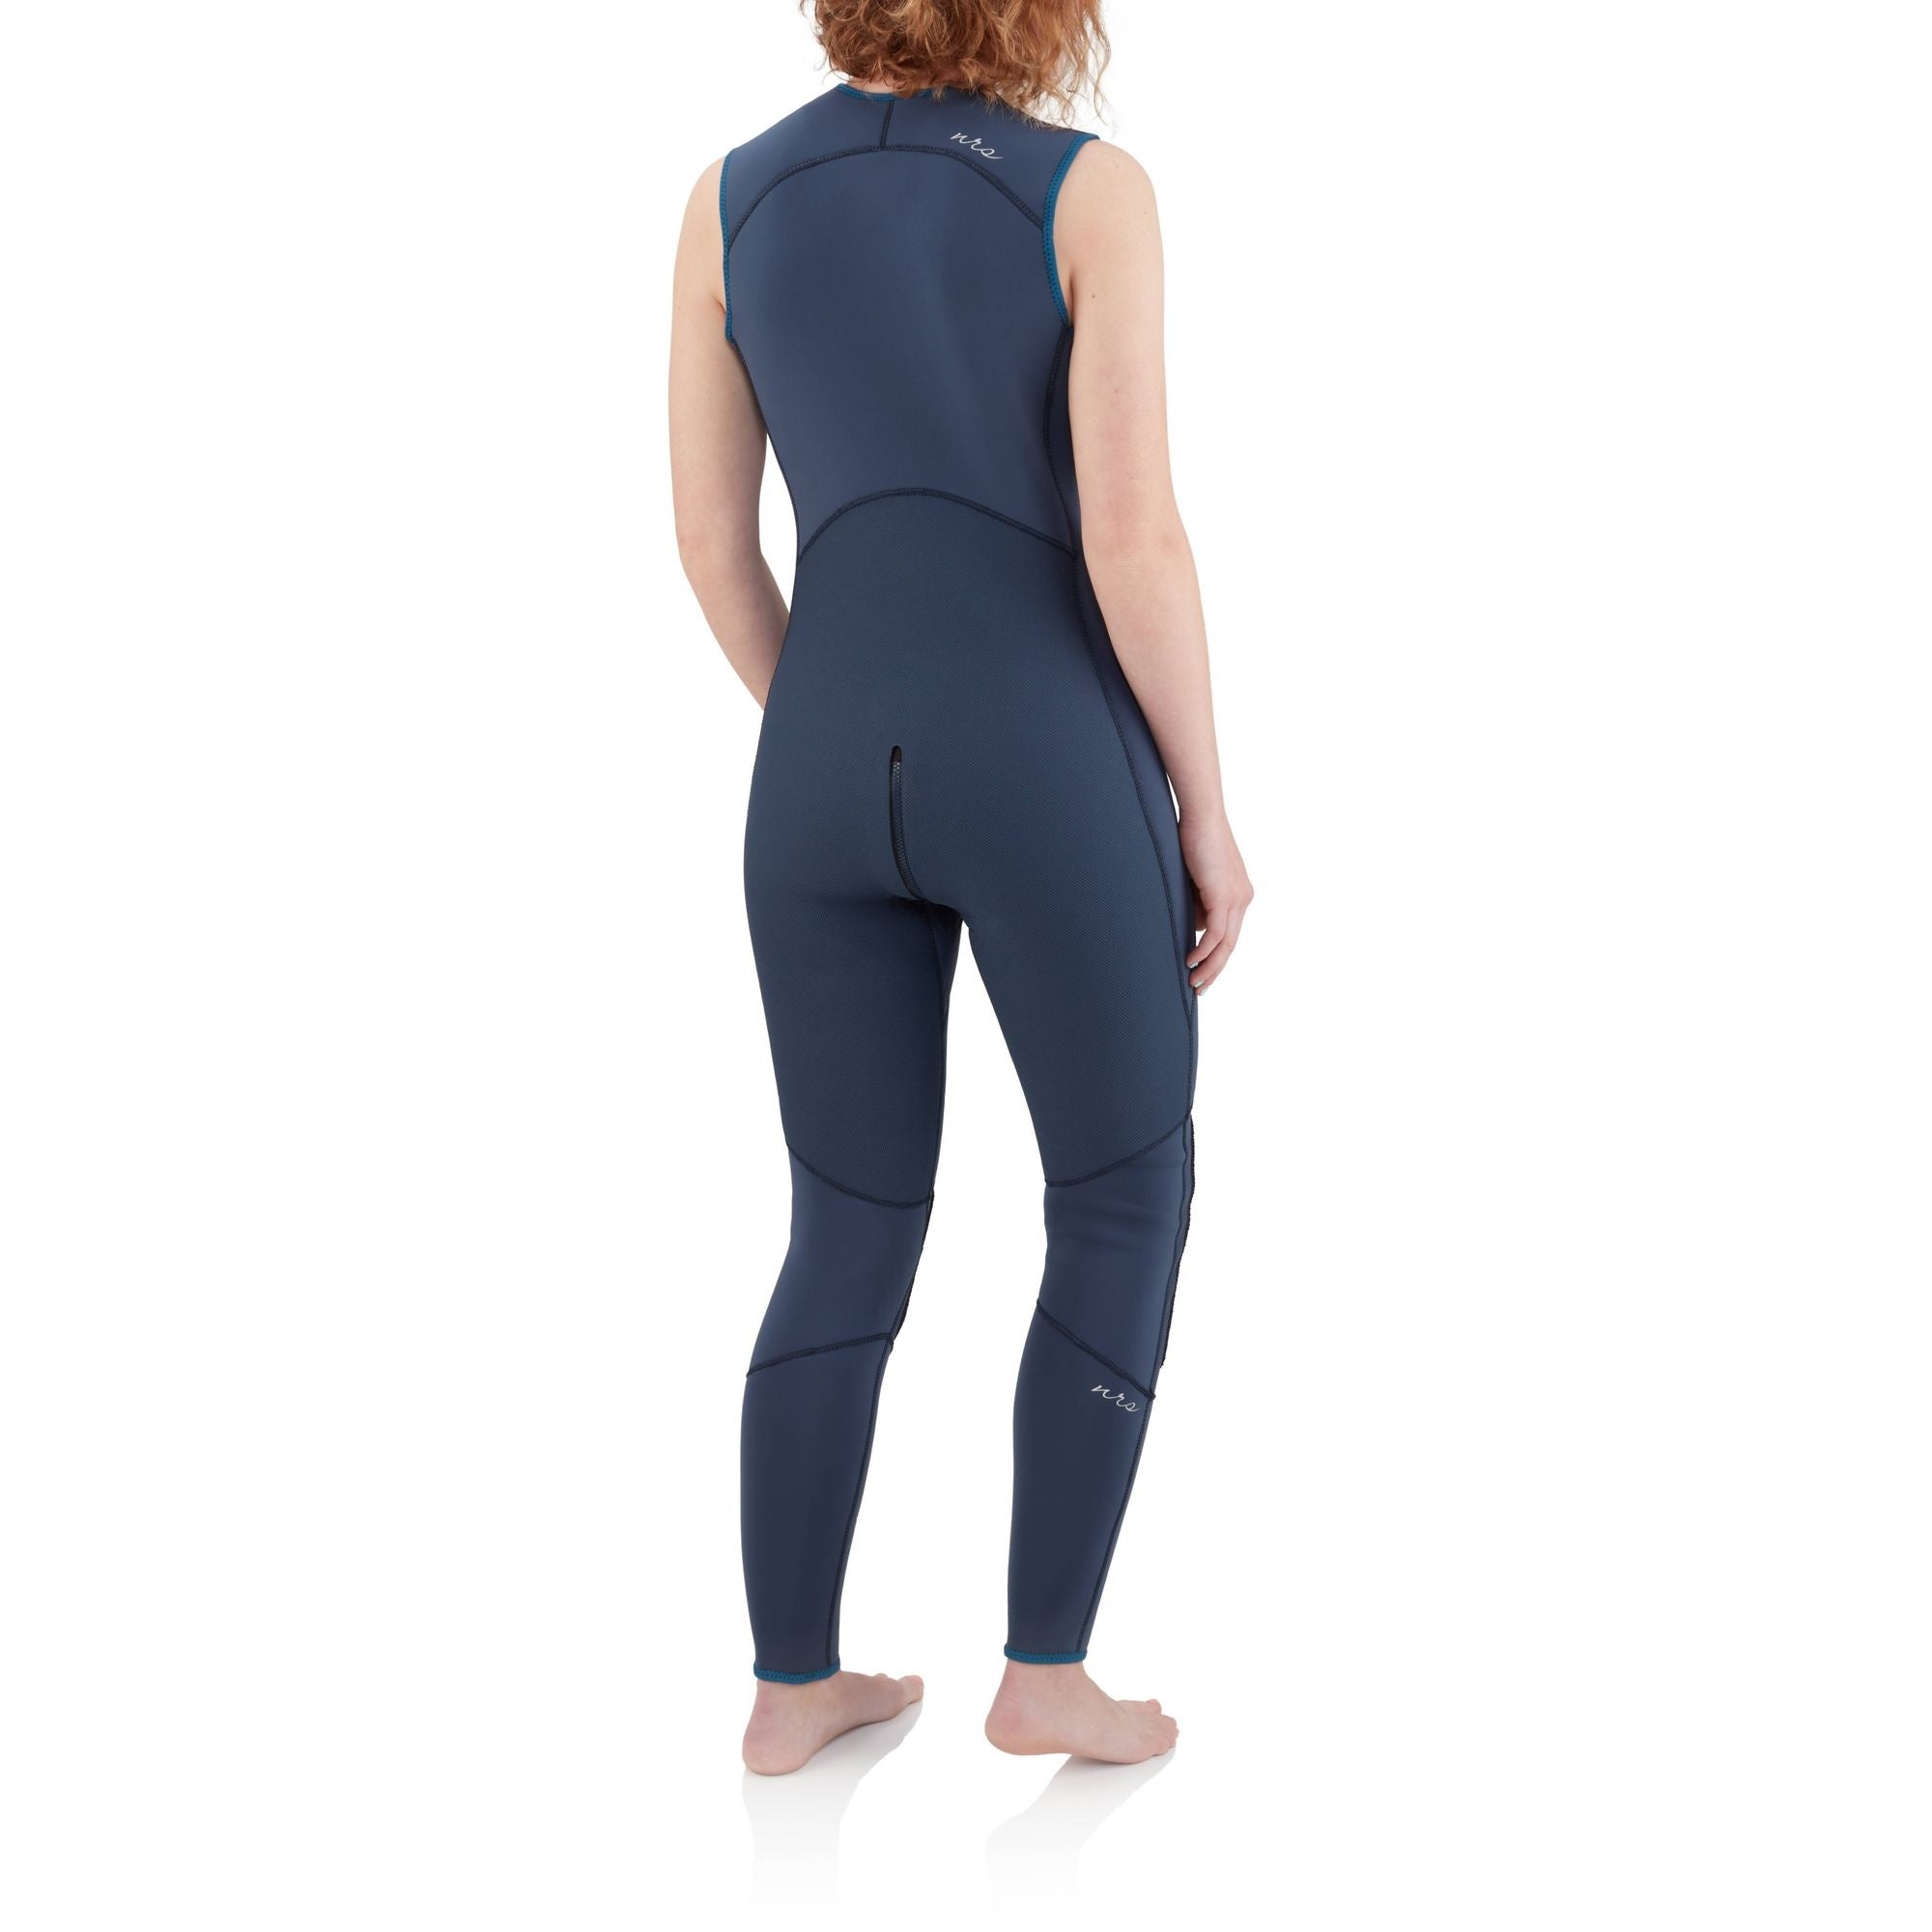 NRS - 3.0 Ultra Jane Wetsuit